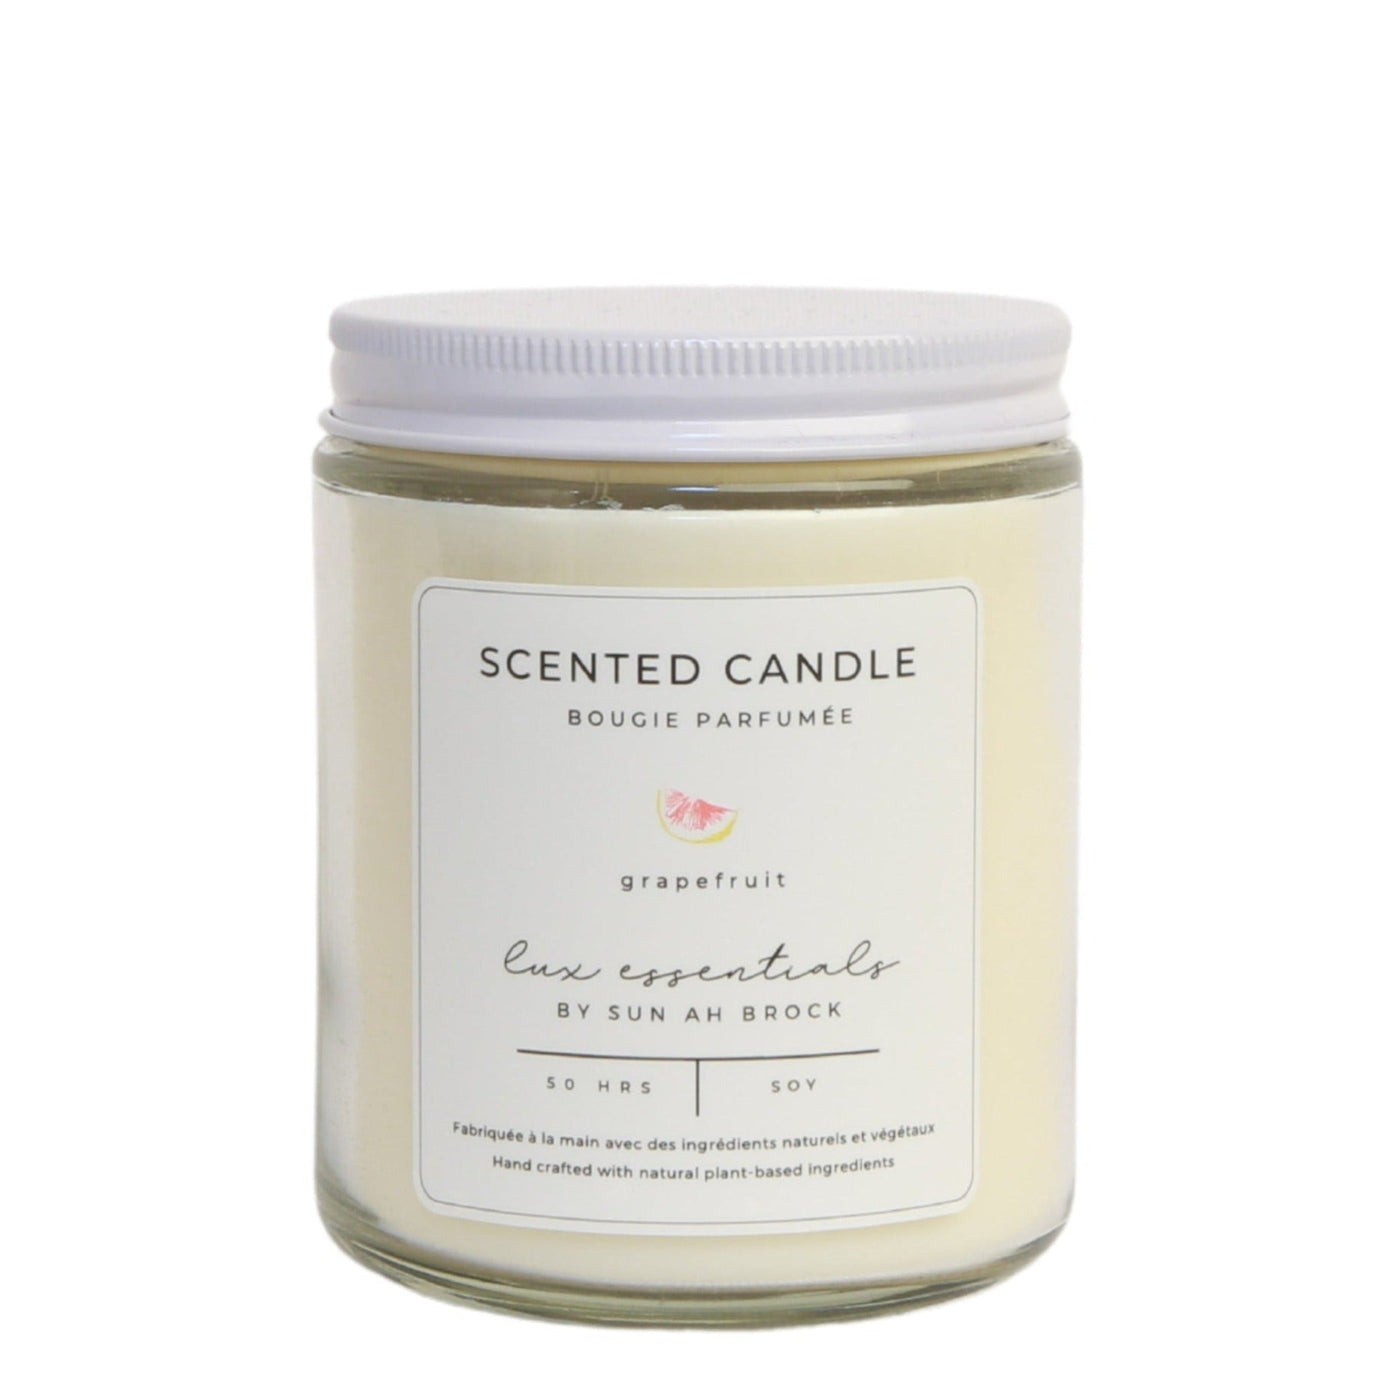 LUX essentials Grapefruit Soy Candle